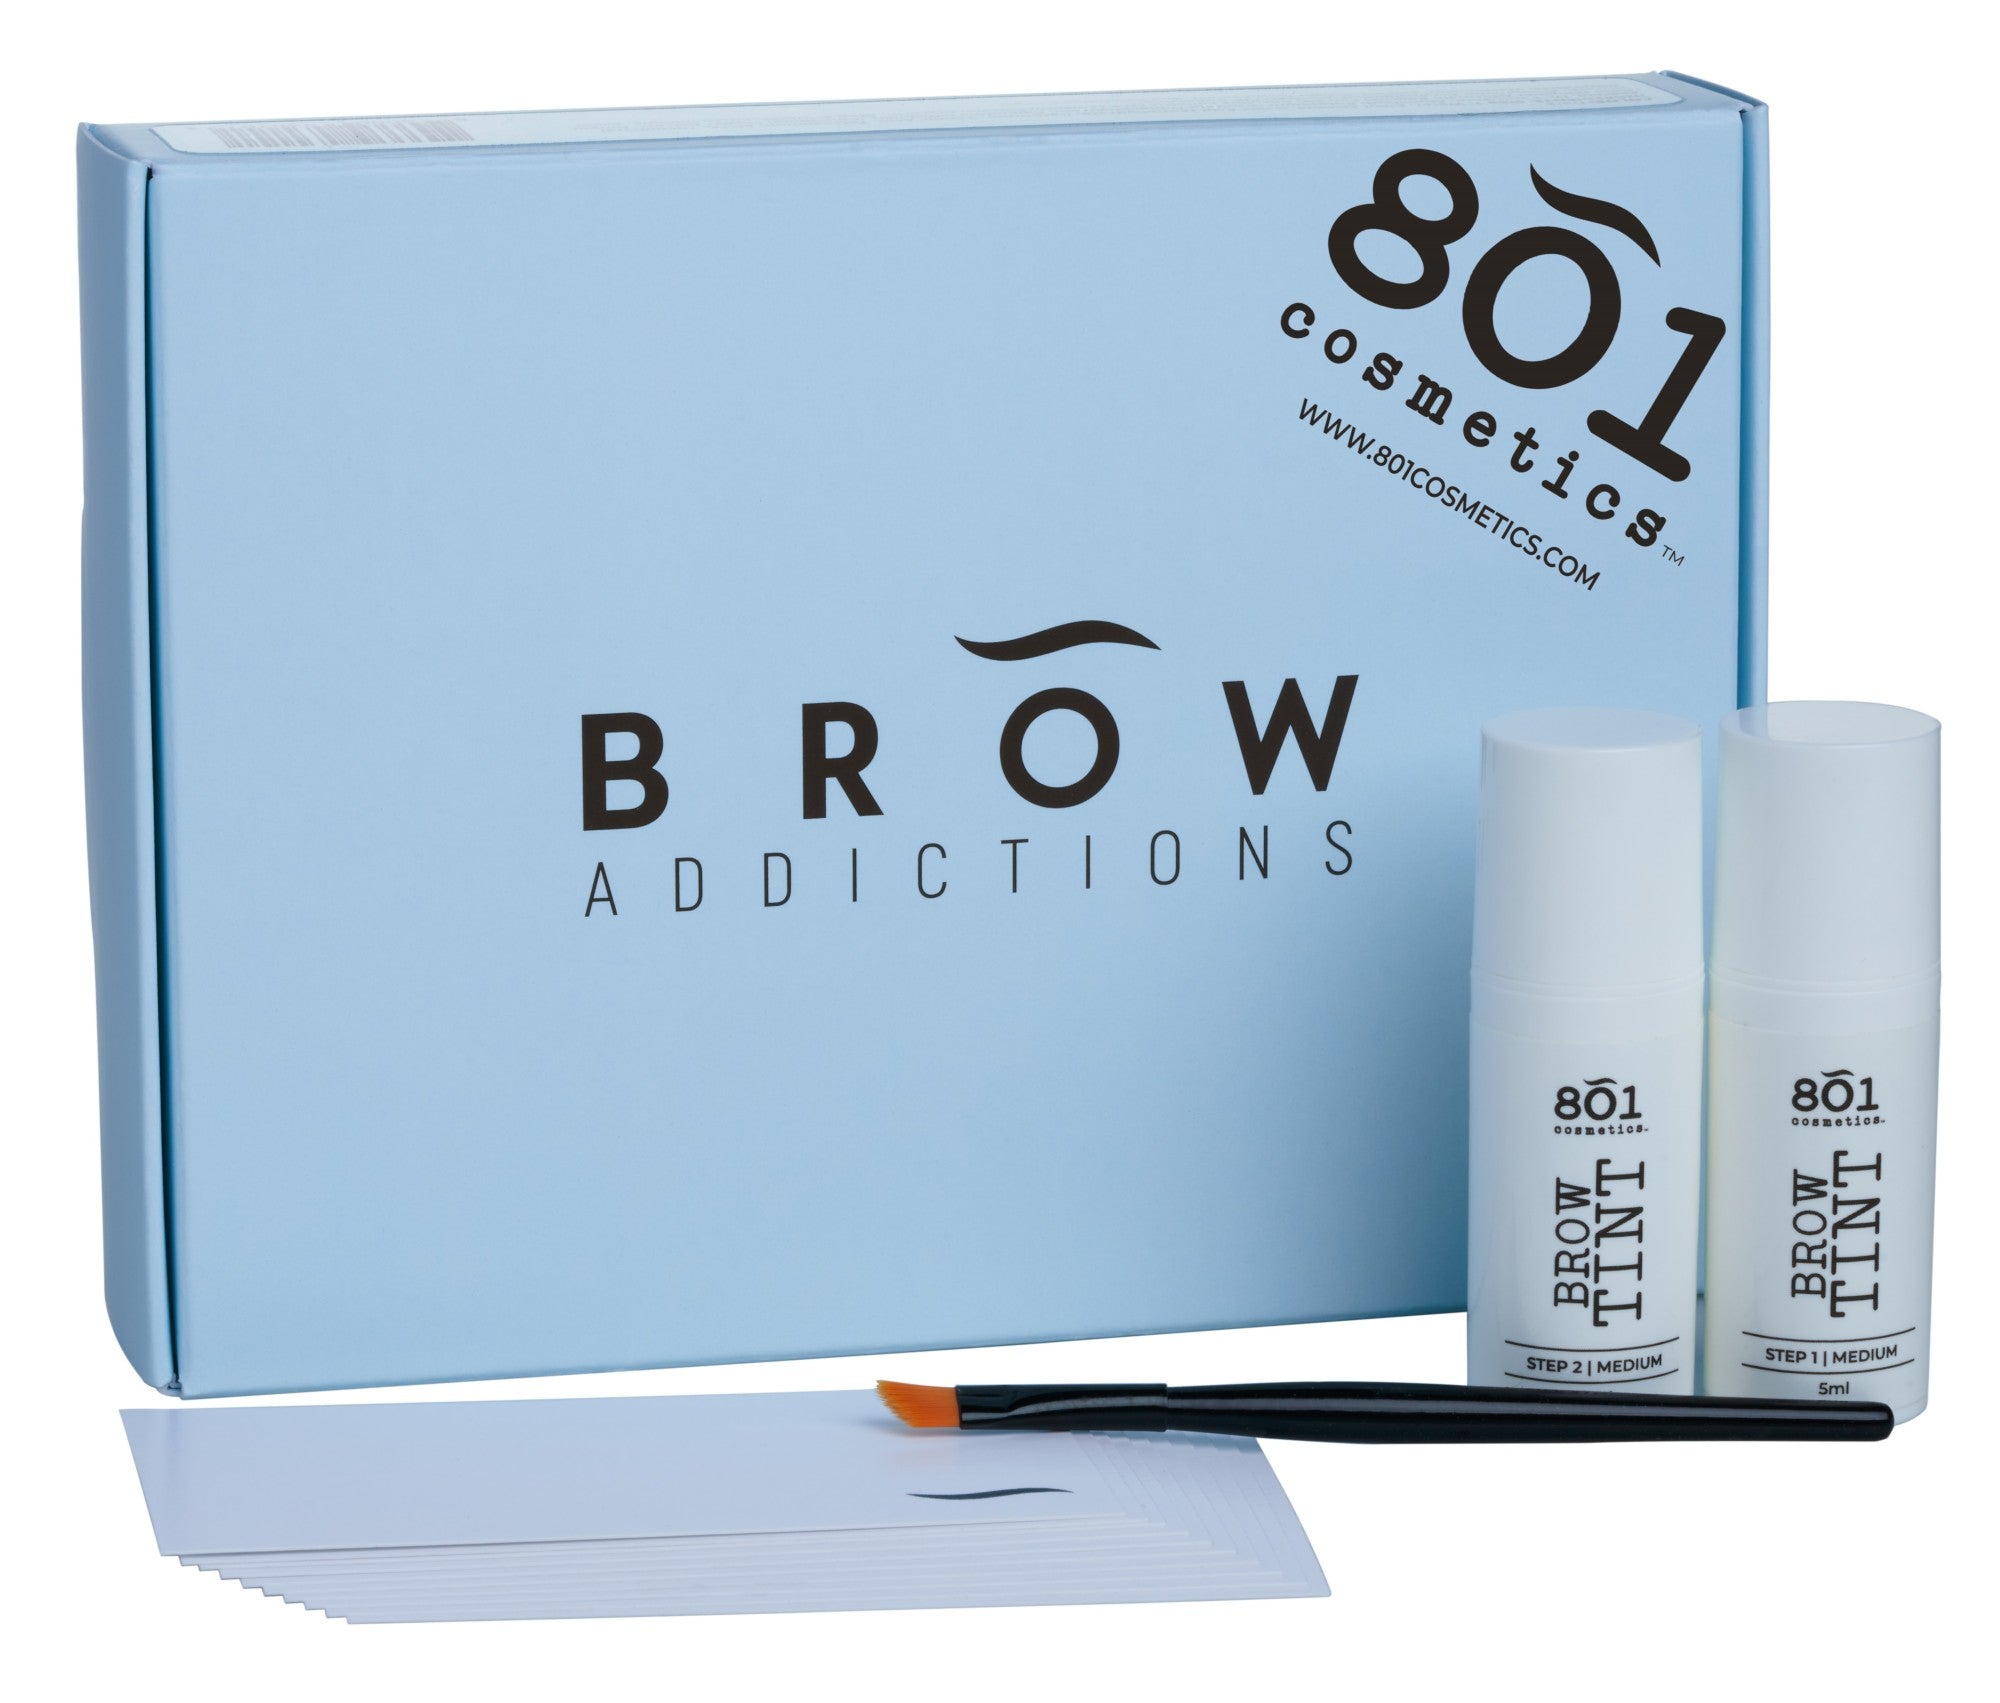 The Ultimate Brow Kit